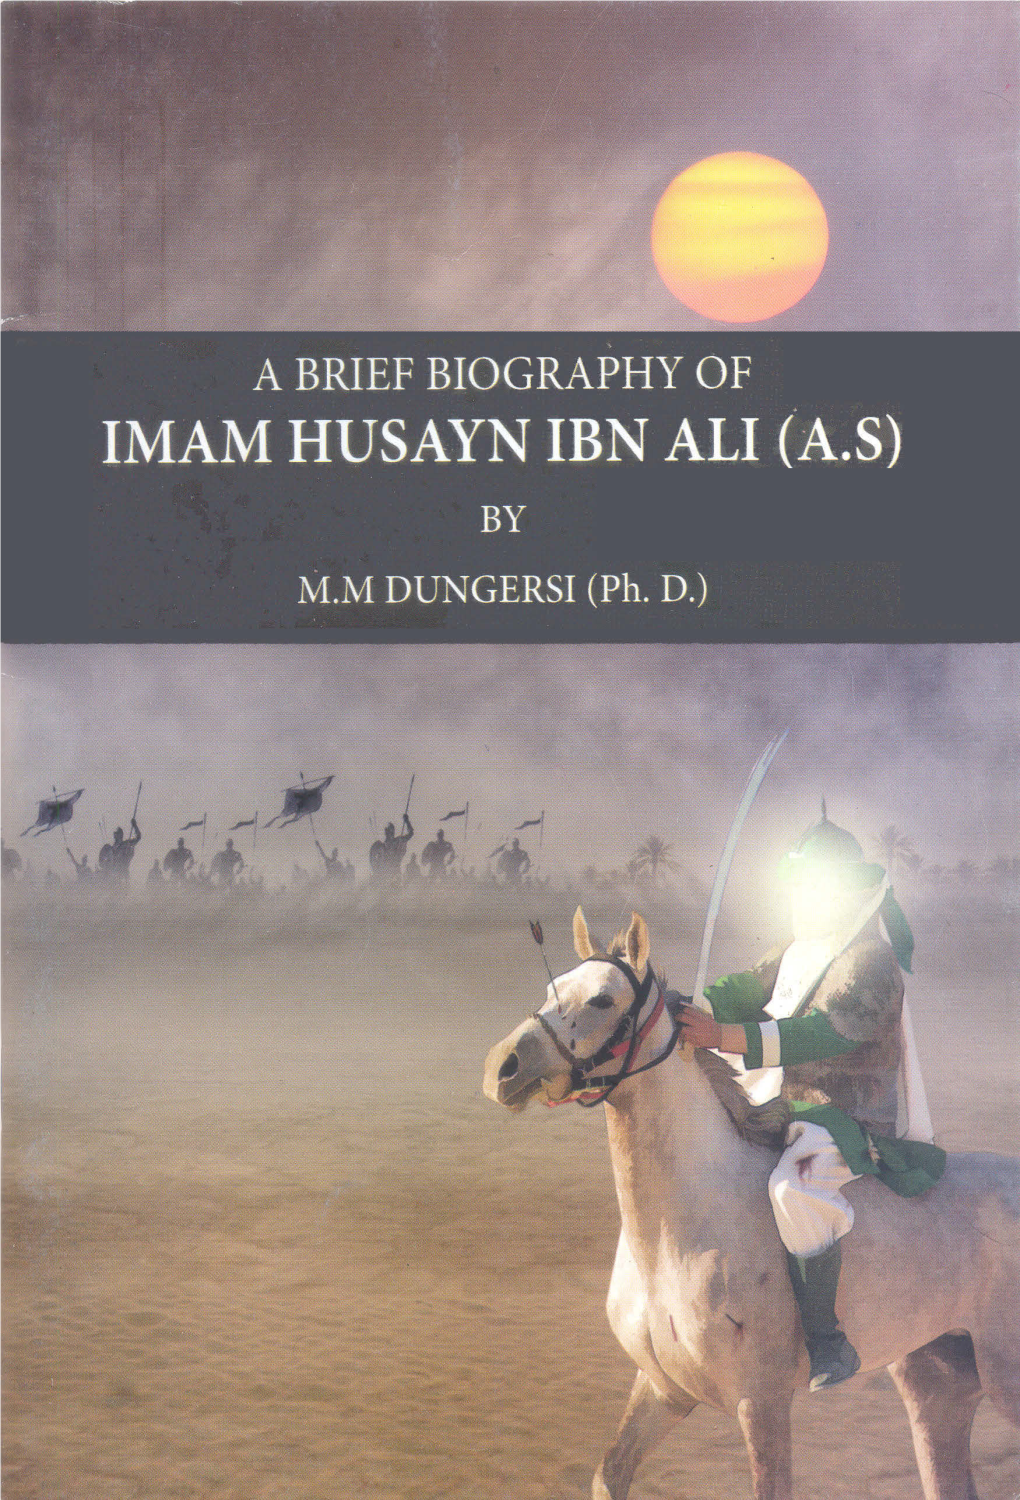 A Brief Biography of Imam HUSAYN (A.S.)